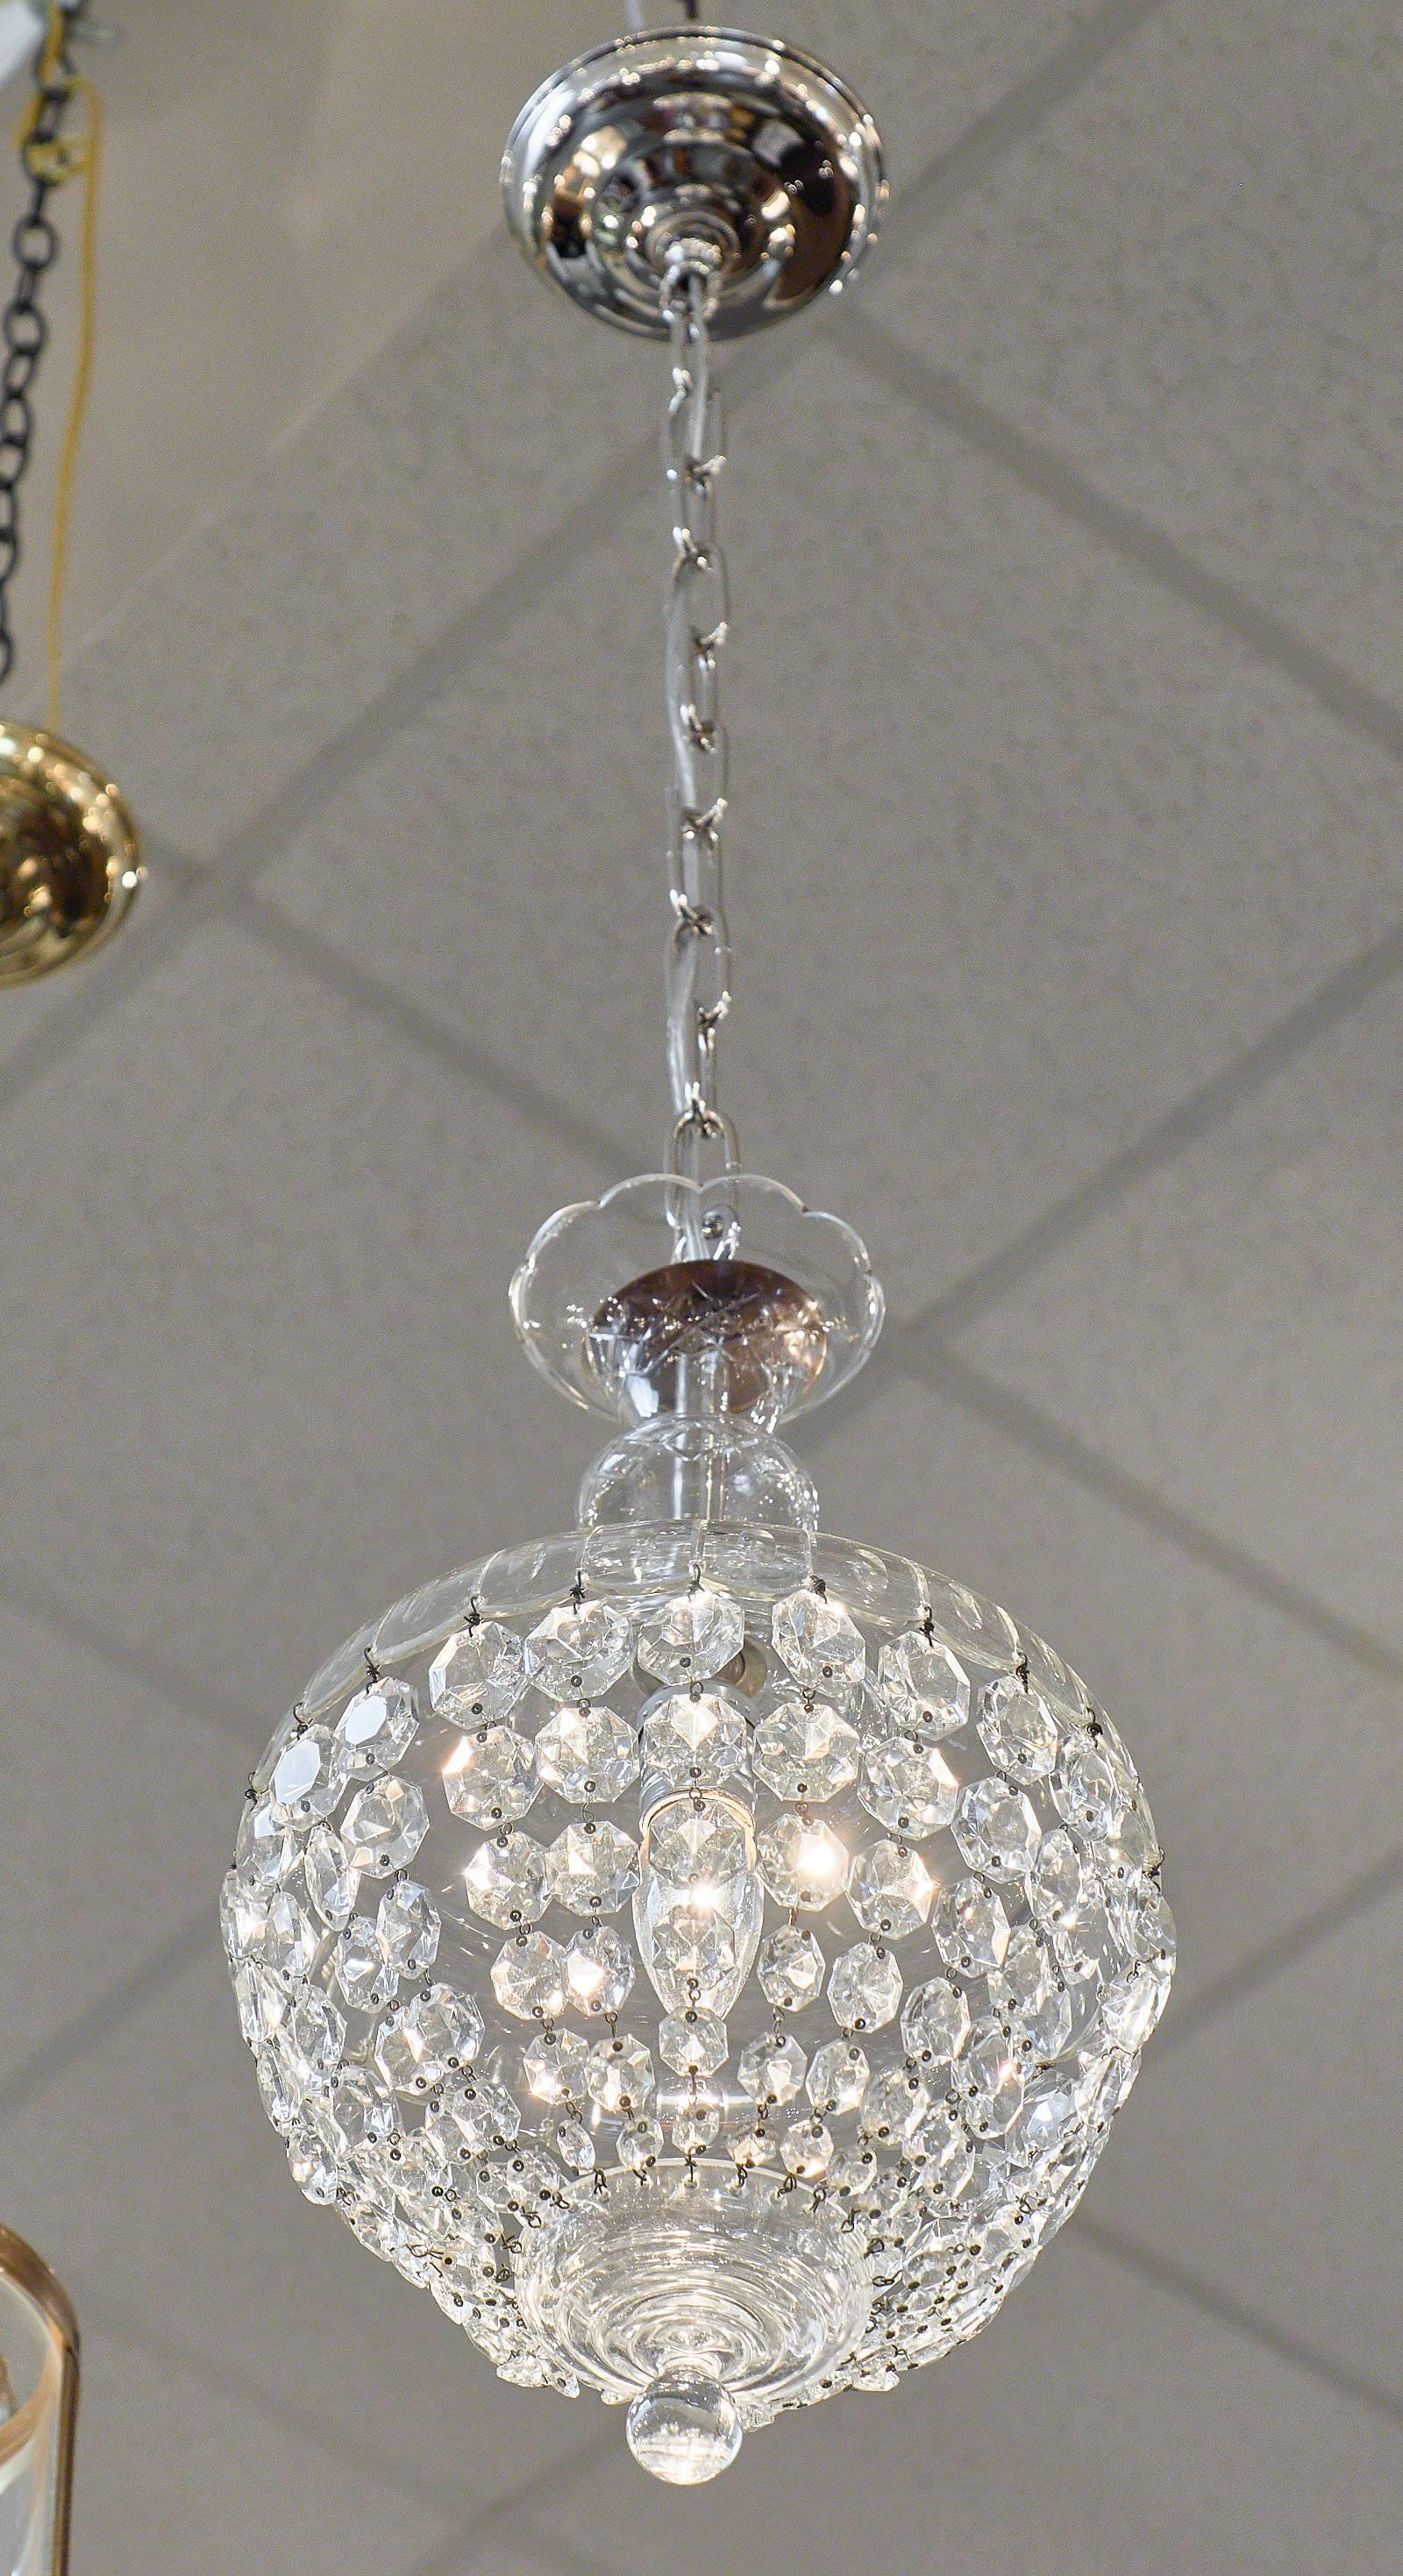 French antique crystal Baccarat chandelier of multiple strands of cut crystal “cabochons” connected to a crystal bell. We loved the sparkle down to the bottom finial, the crystal is the best quality you can find. This fixture requires one